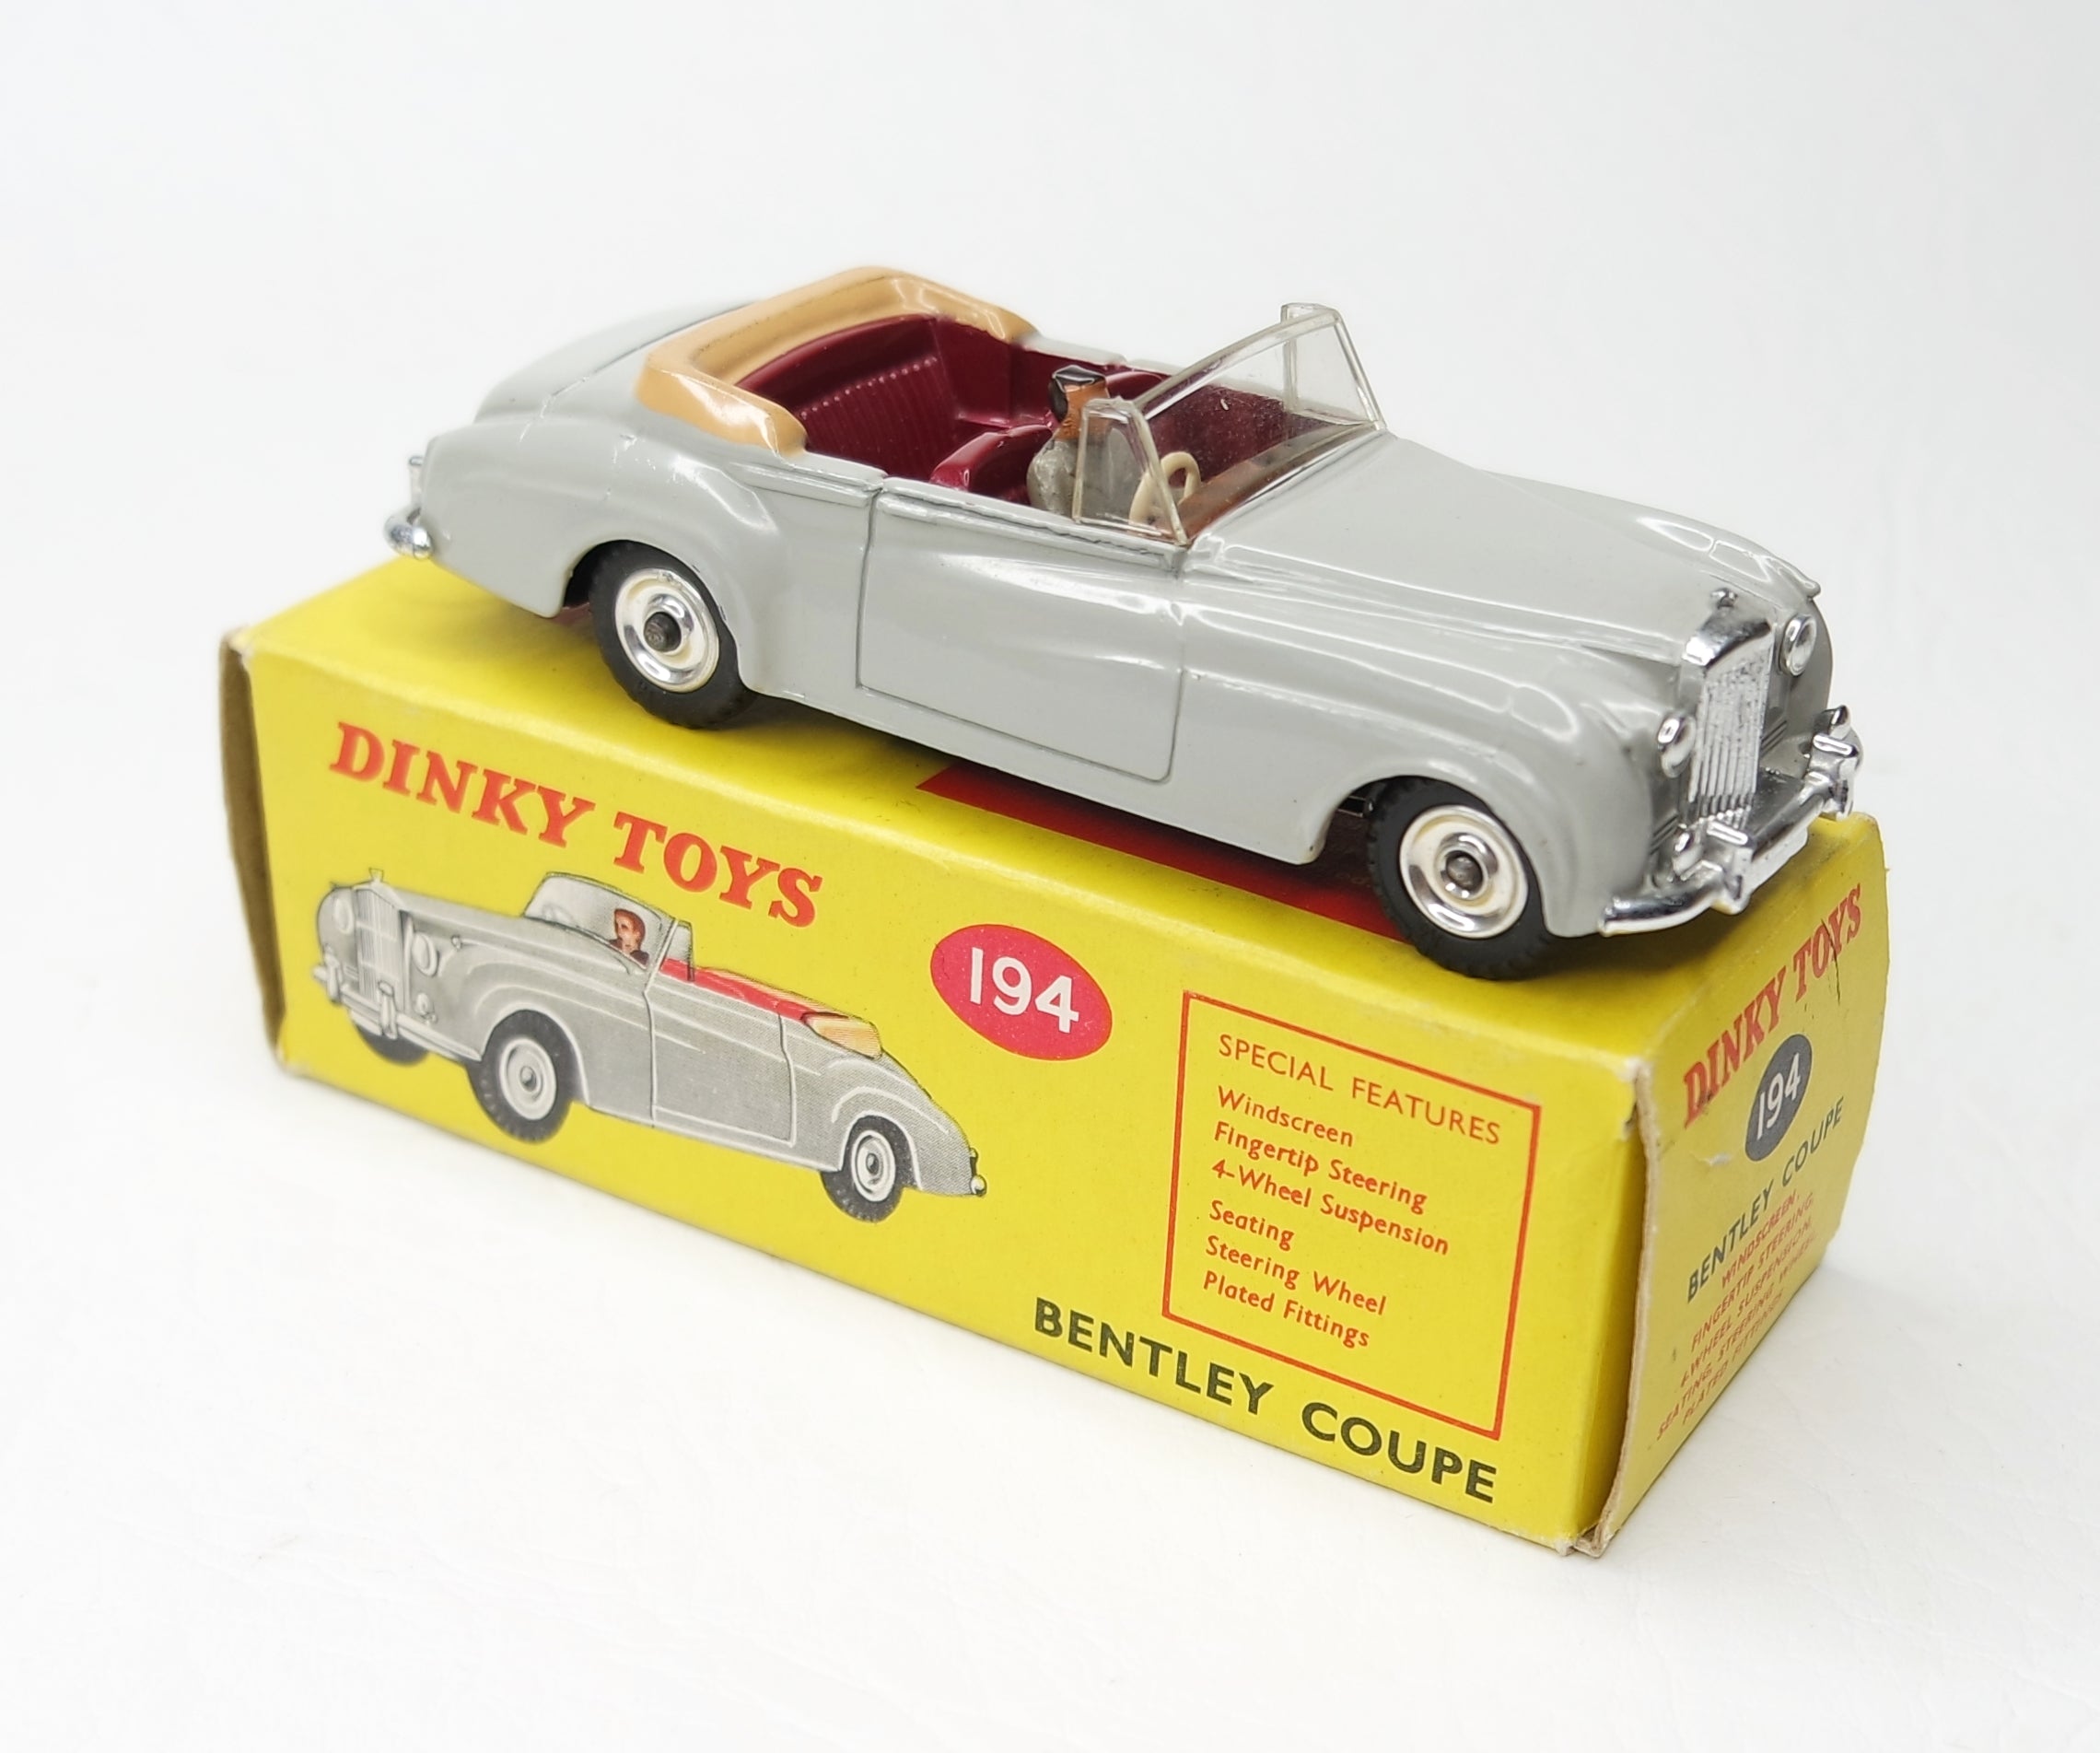 Dinky Toys 194 Bentley Coupe Very Near Mint/Boxed (C.C). – JK DIE 